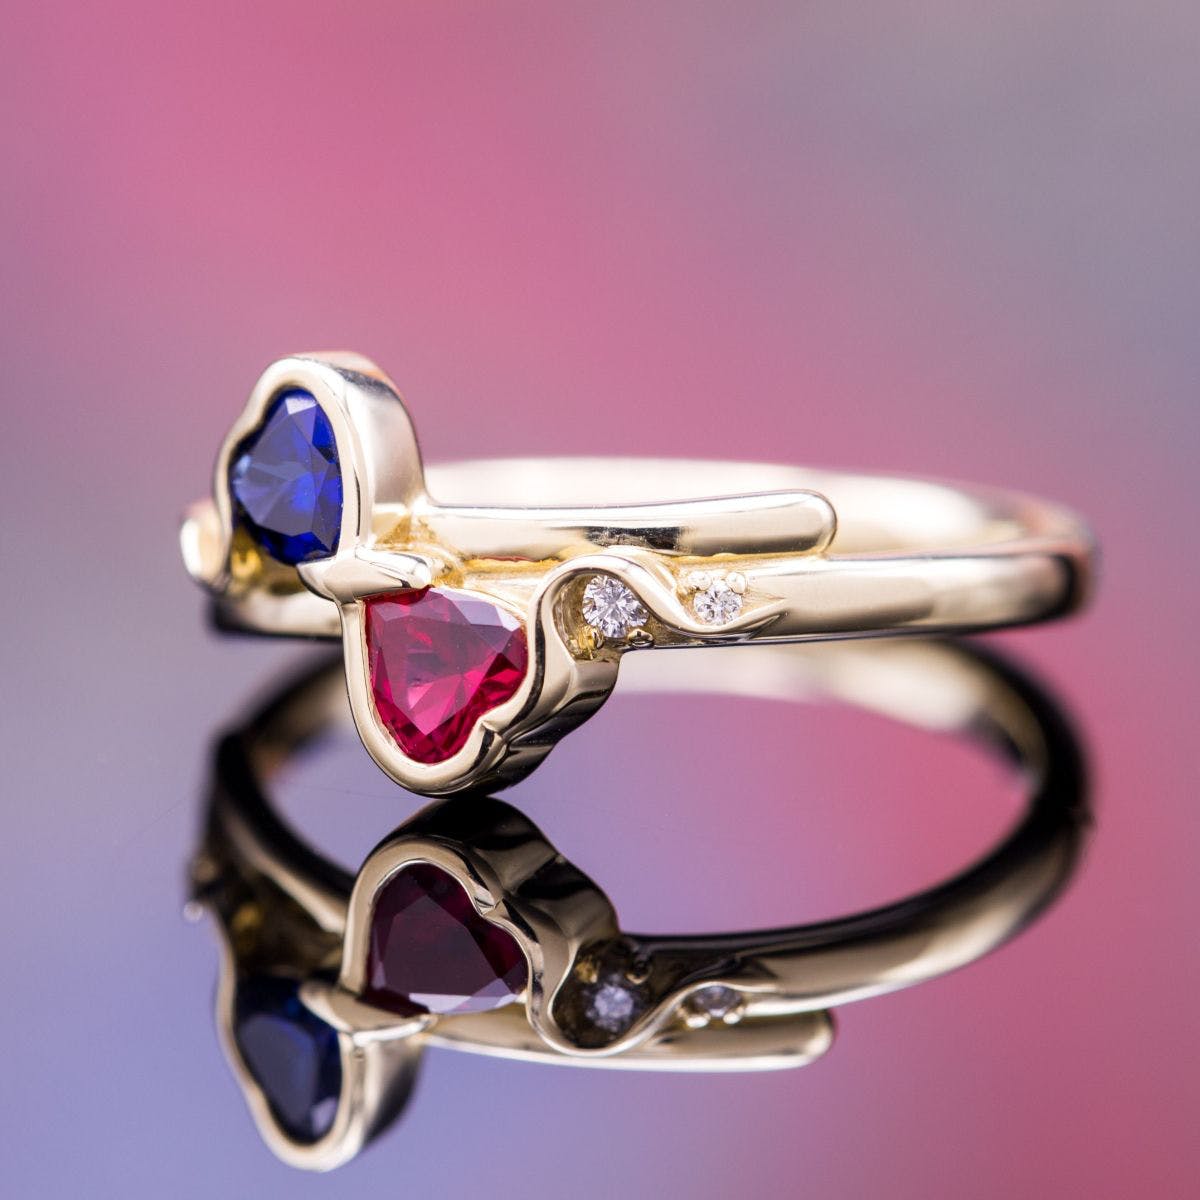 How Do Rubies and Sapphires Form?